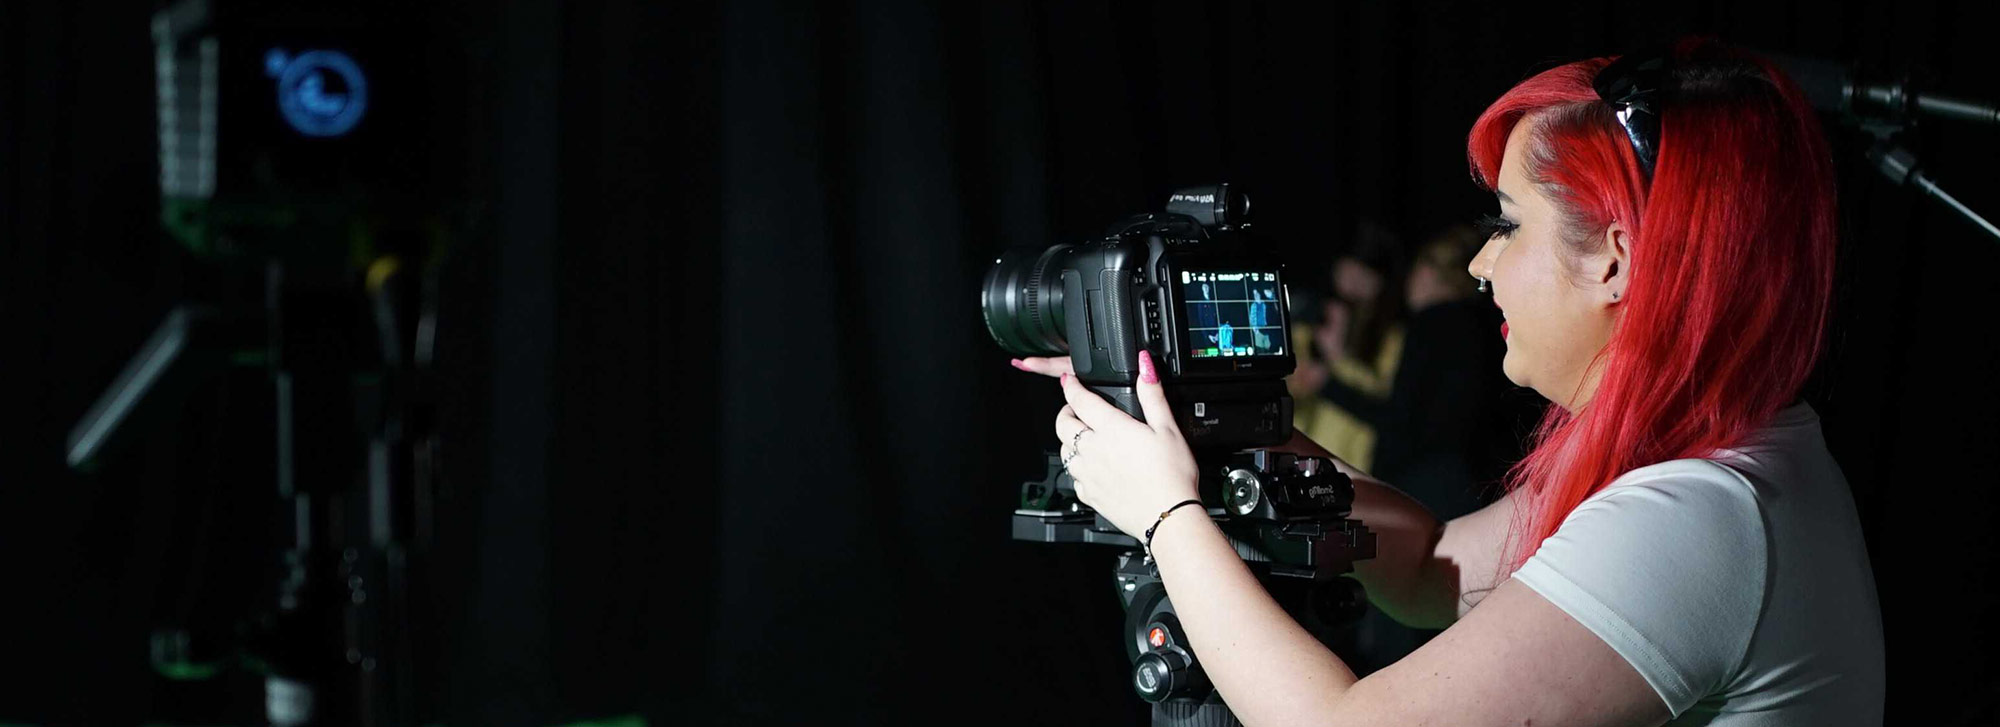 Student using a camera with green screen in the background